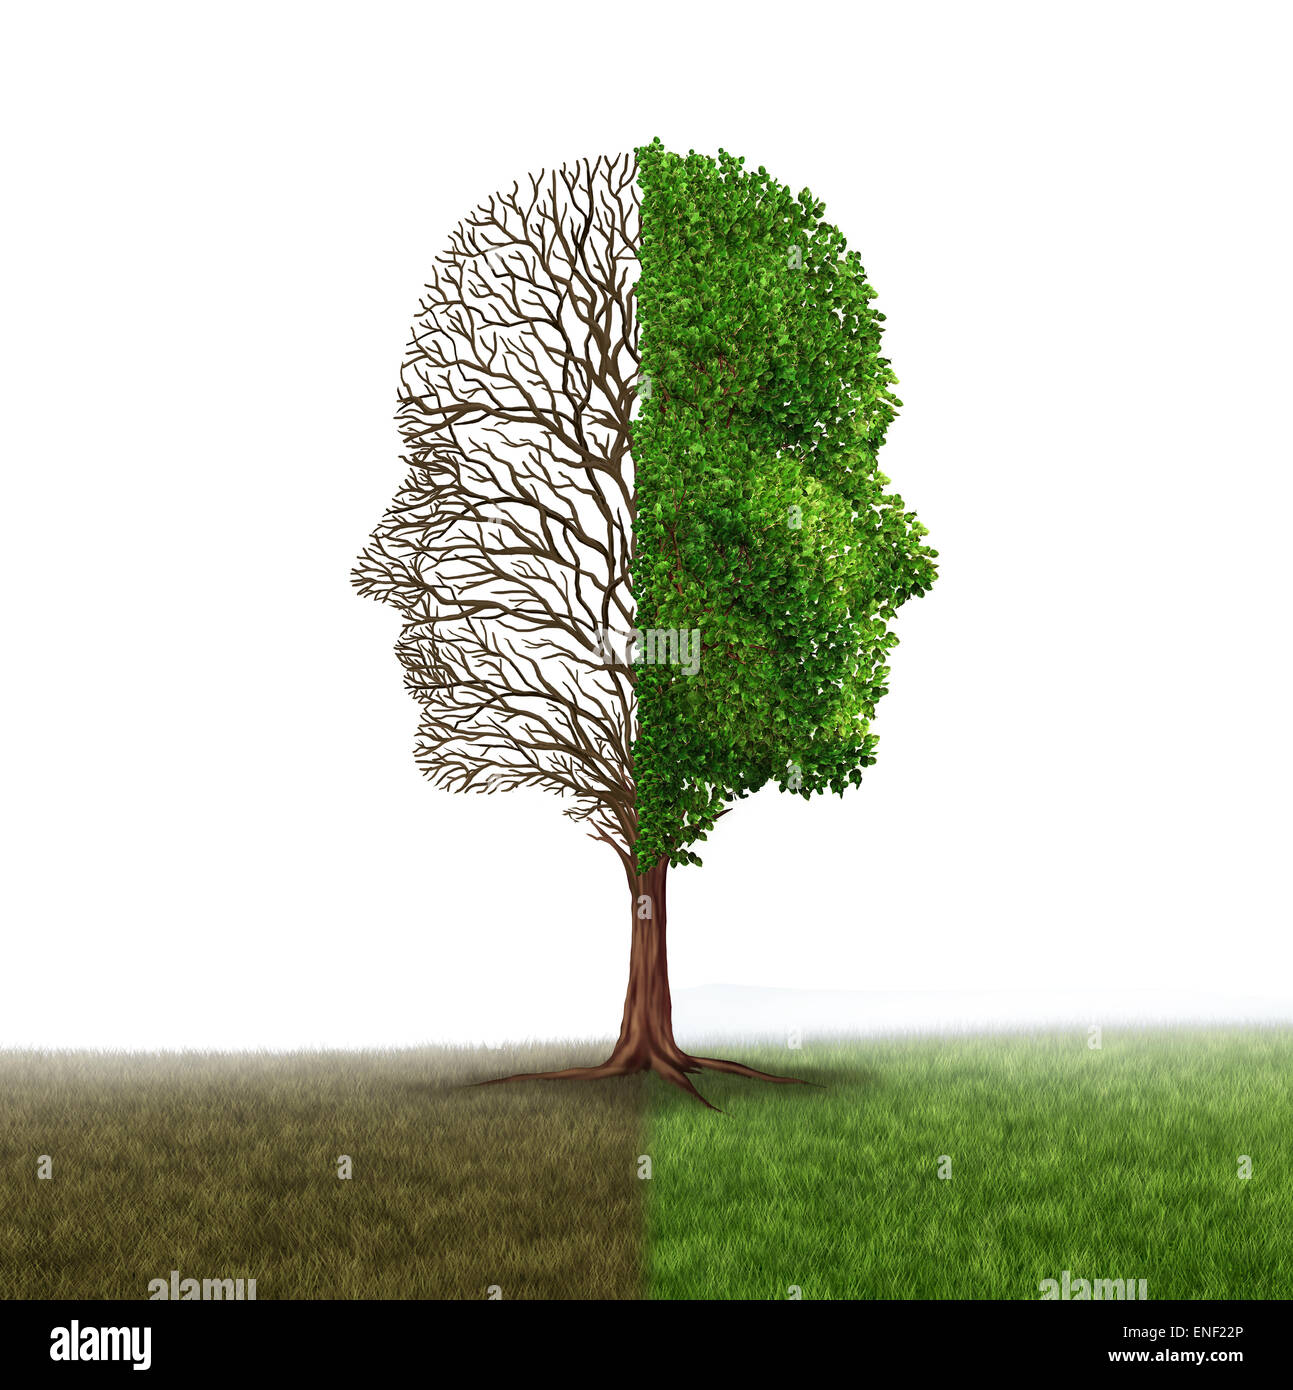 Human emotion and mood disorder as a tree shaped as two human faces with one half empty branches and the opposite side full of leaves as a medical metaphor for psychological contrast in feelings on a white background. Stock Photo